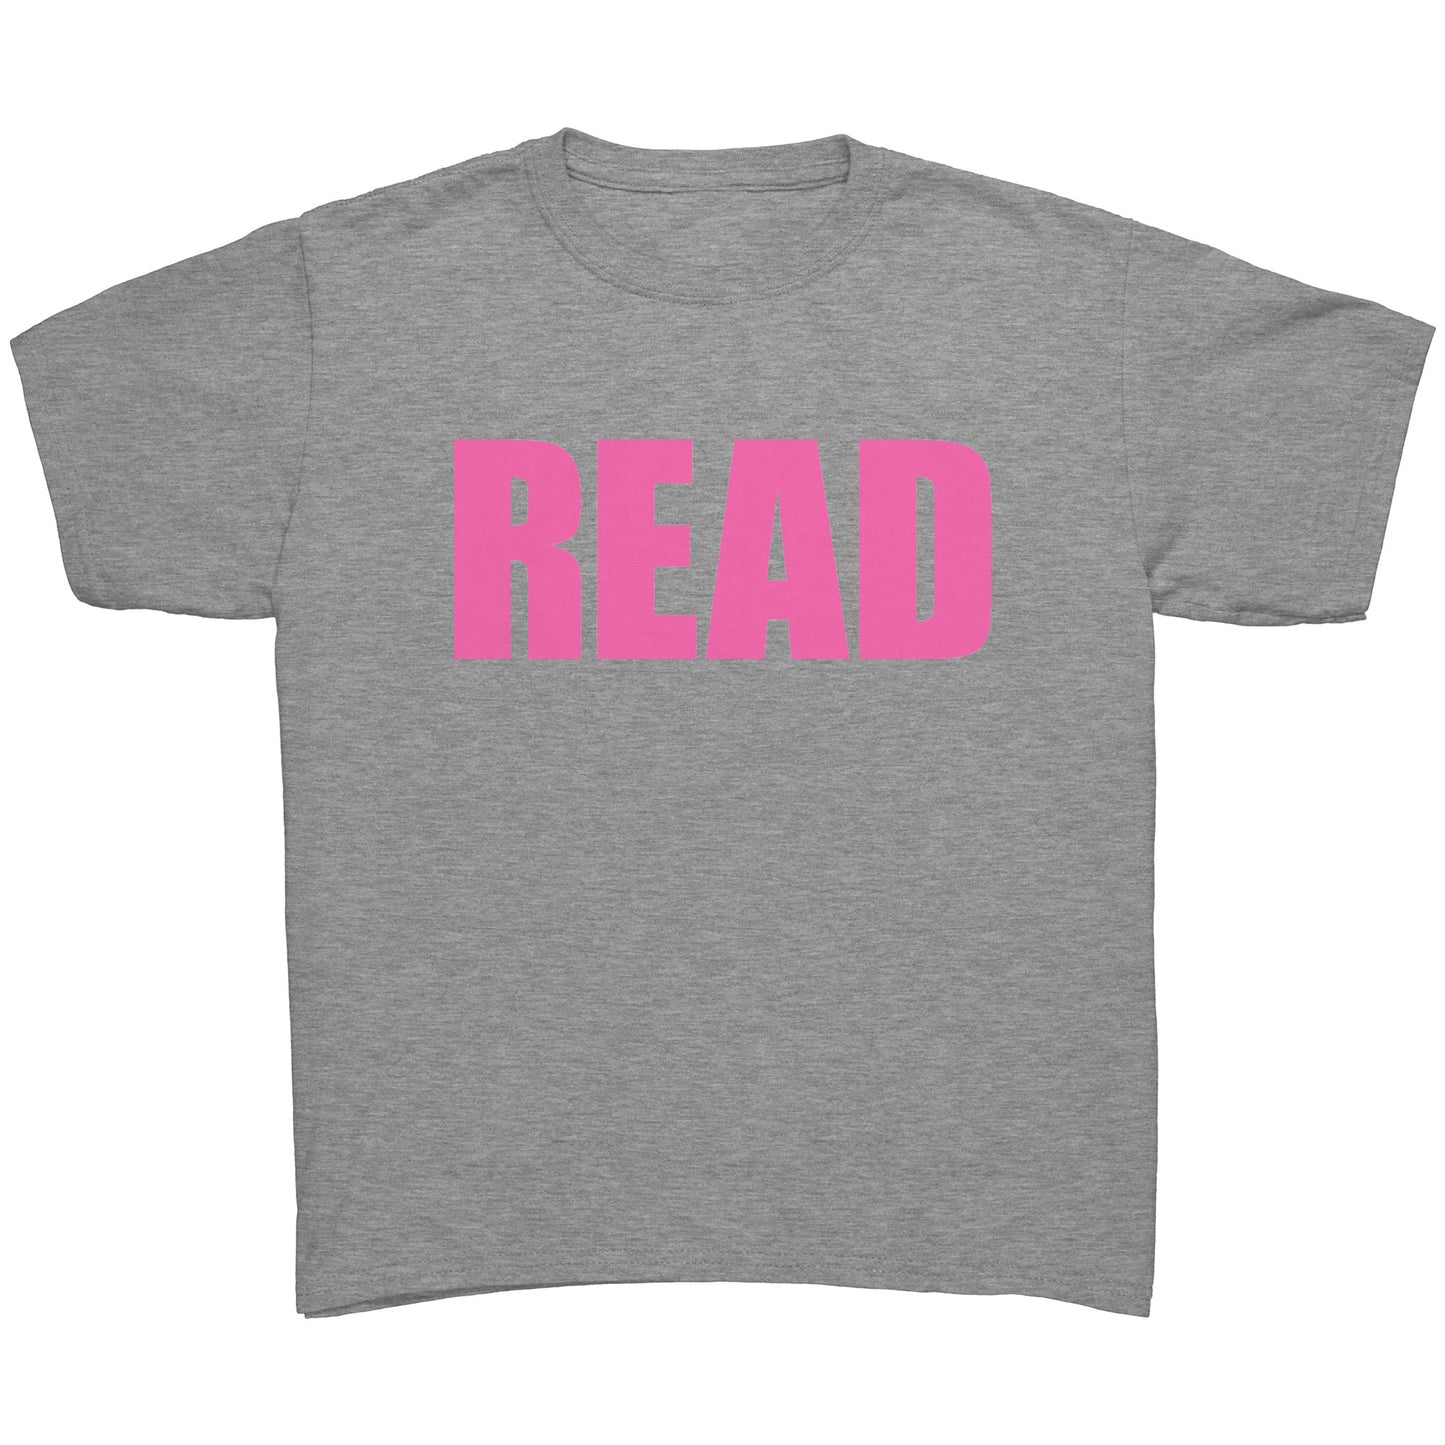 Read T-Shirt/ Pink [Youth Unisex]